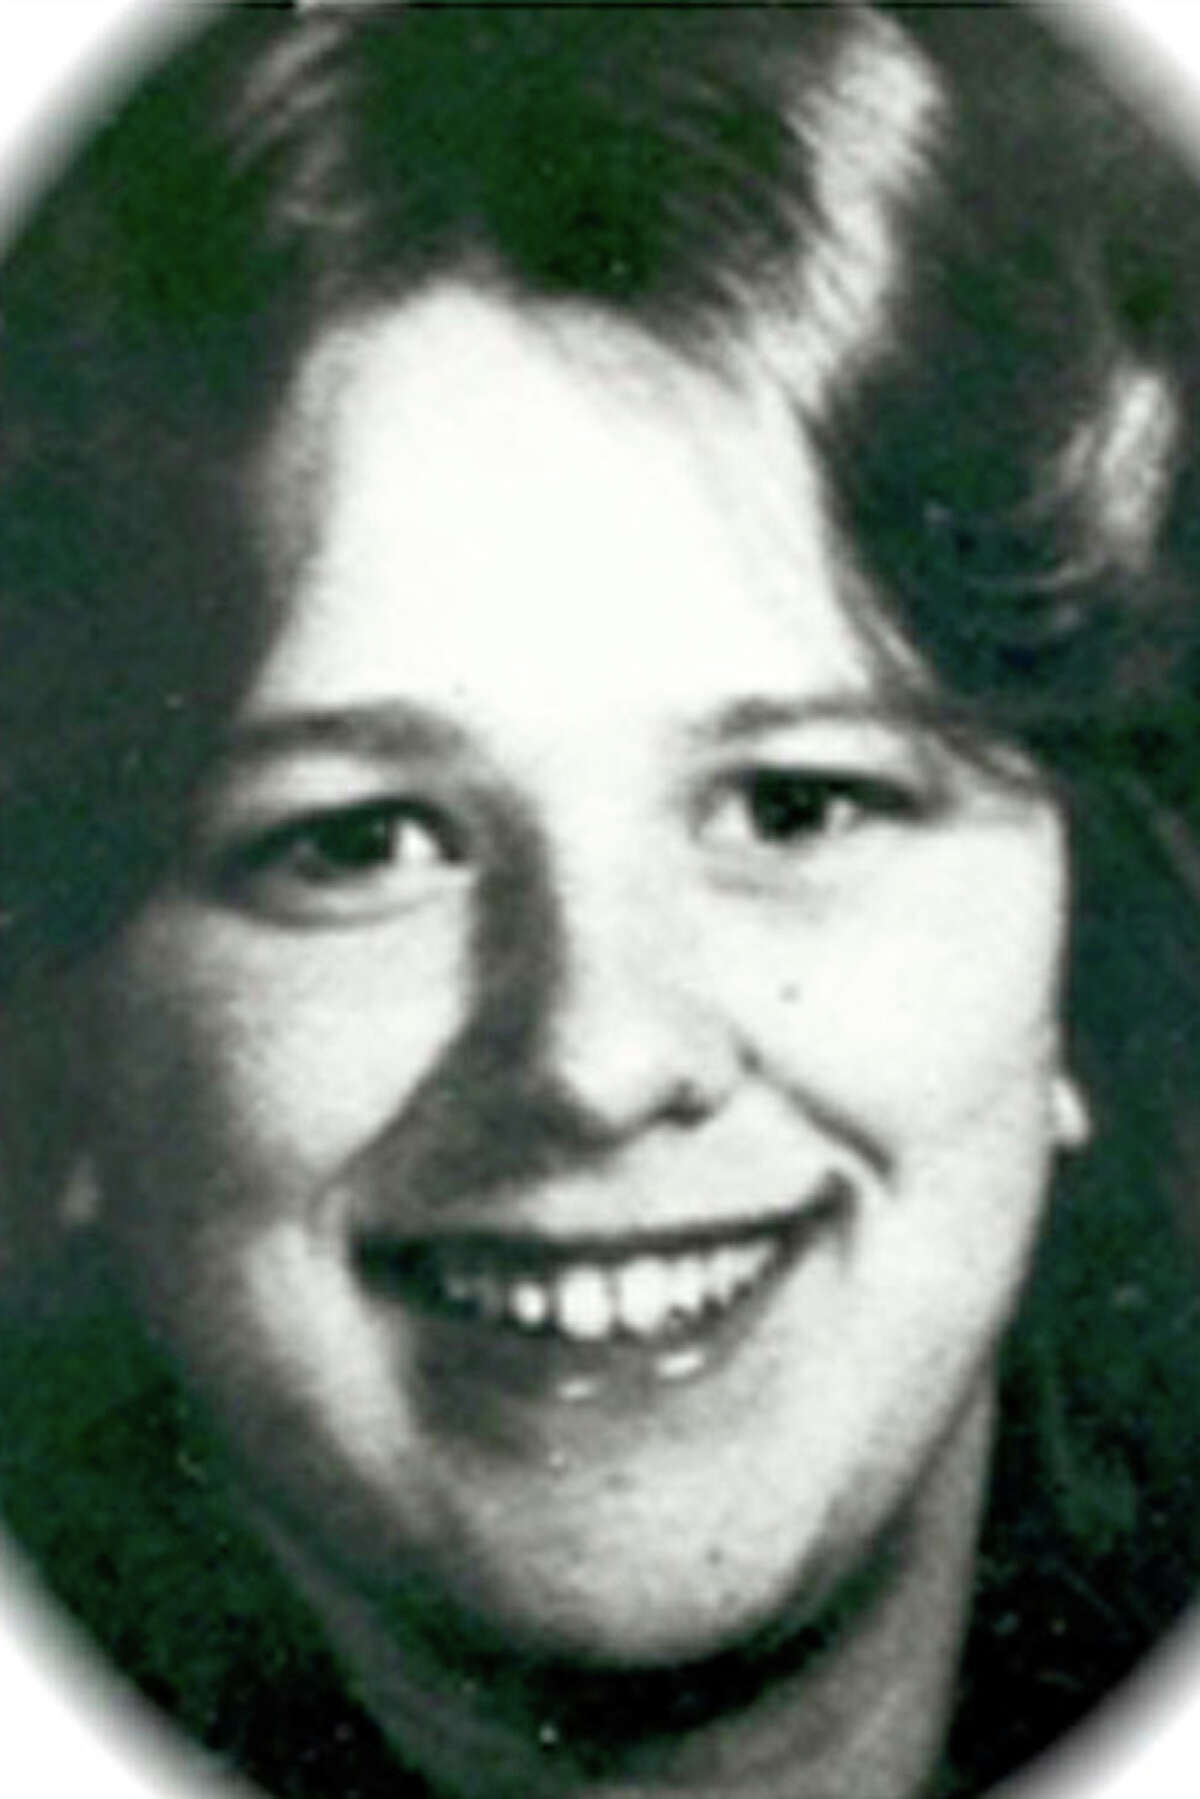 Wendy Lee Coffield, 16, disappeared July 8, 1982. Her remains were found July 15, 1982.